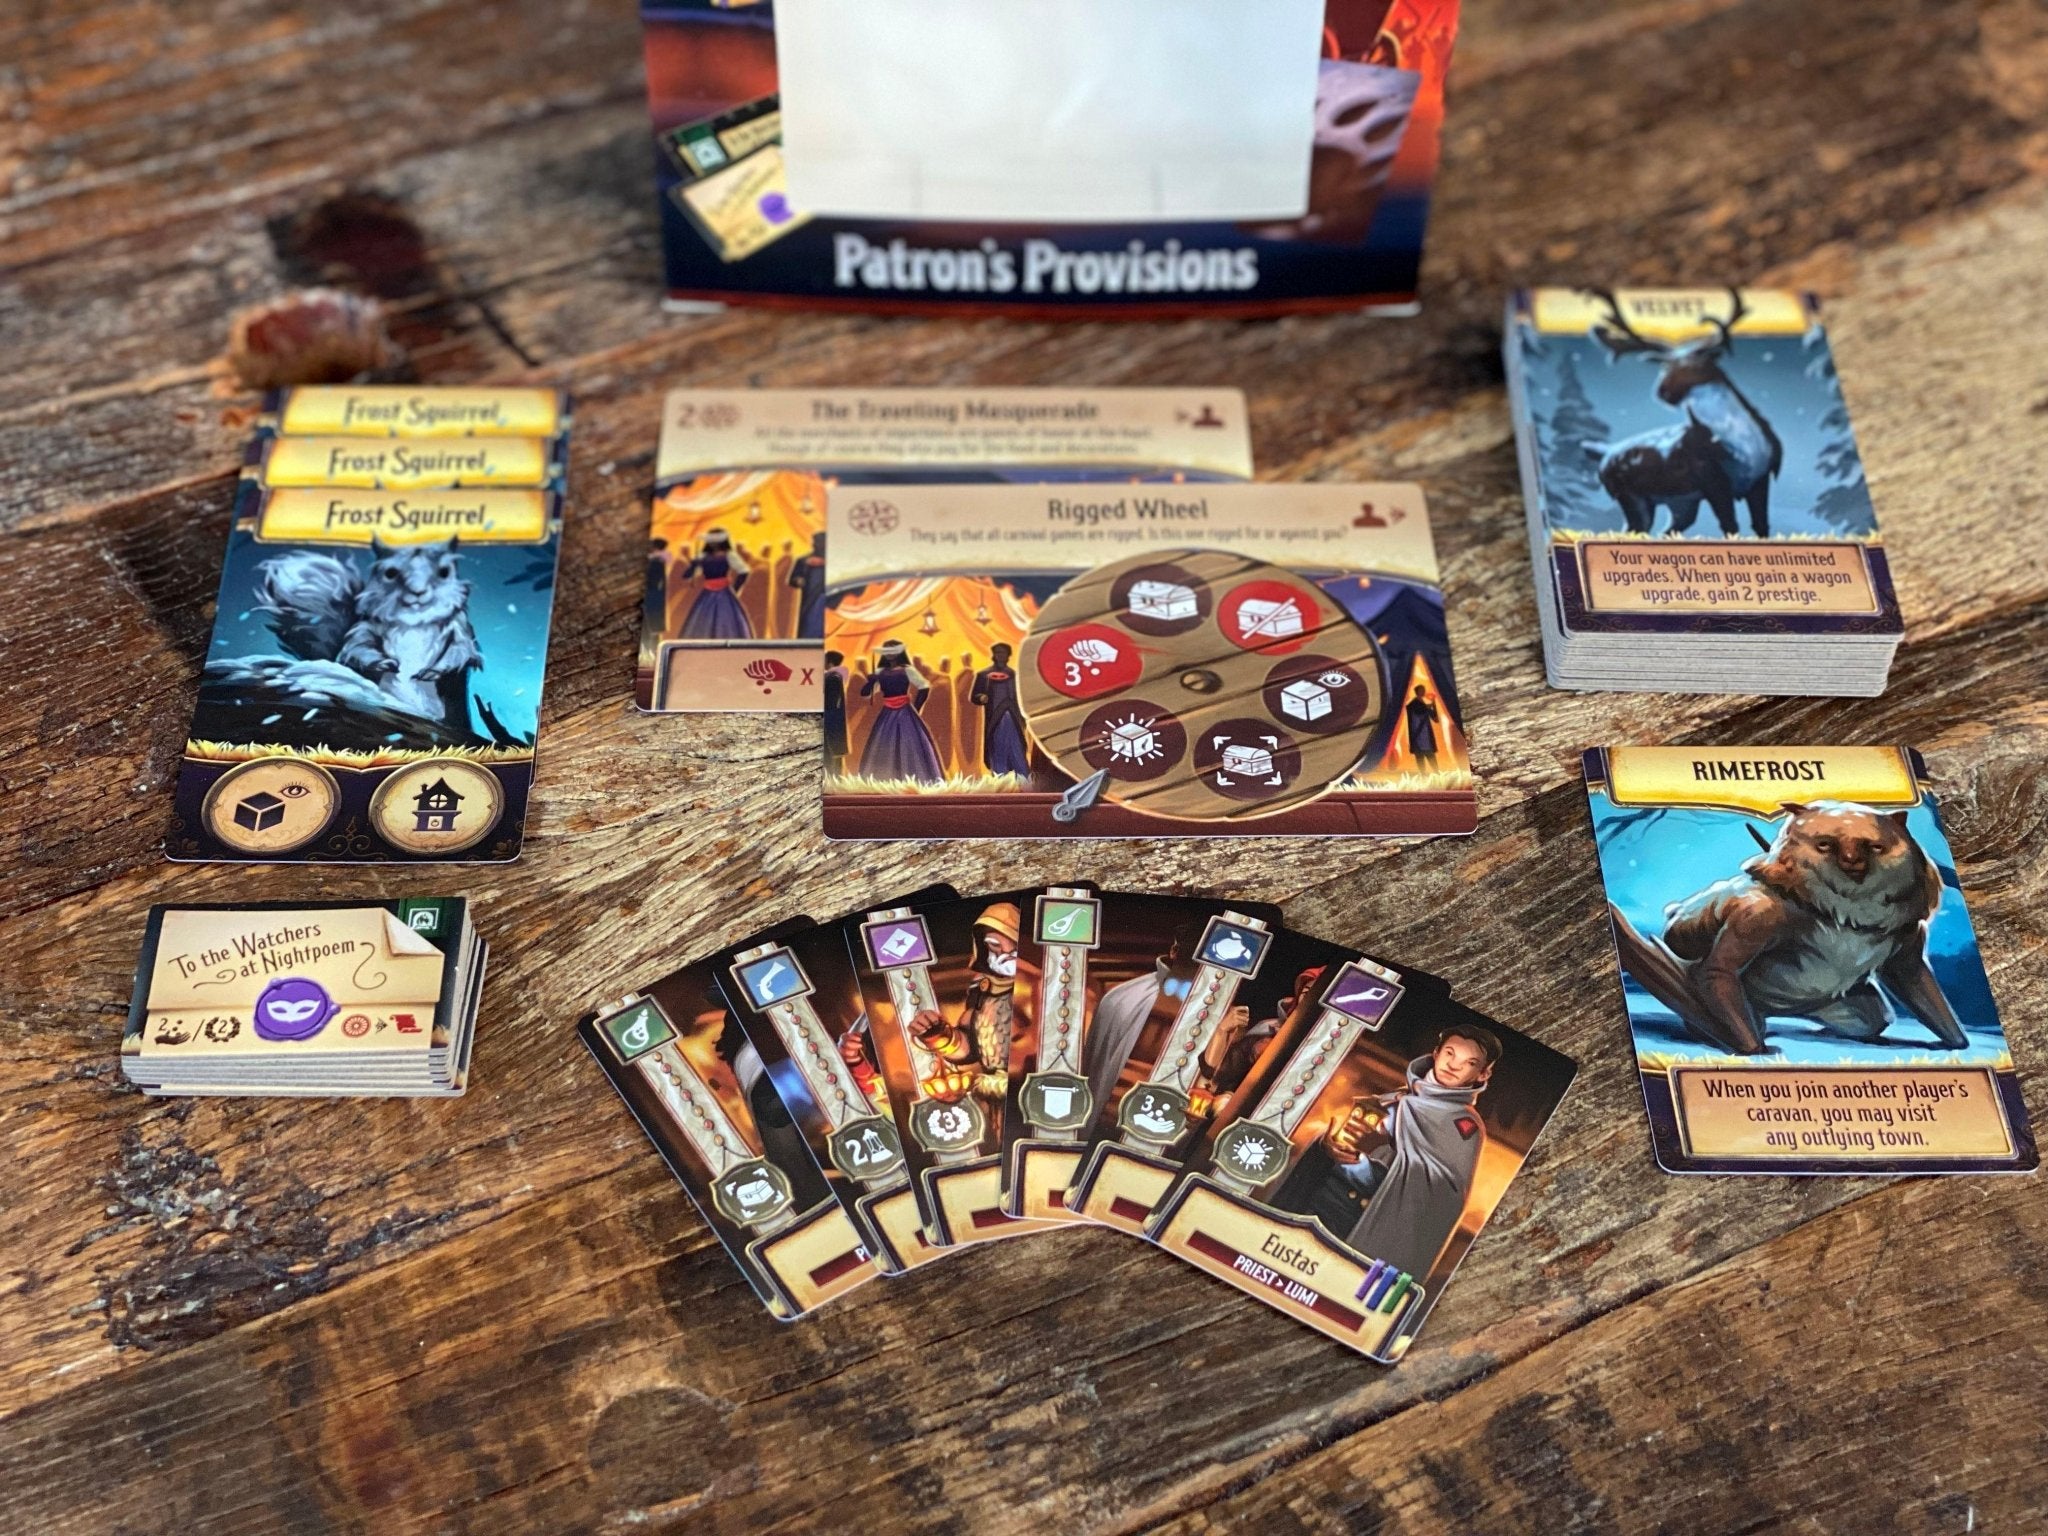 Merchants of the Dark Road: Patron's Provisions - Gaming Library